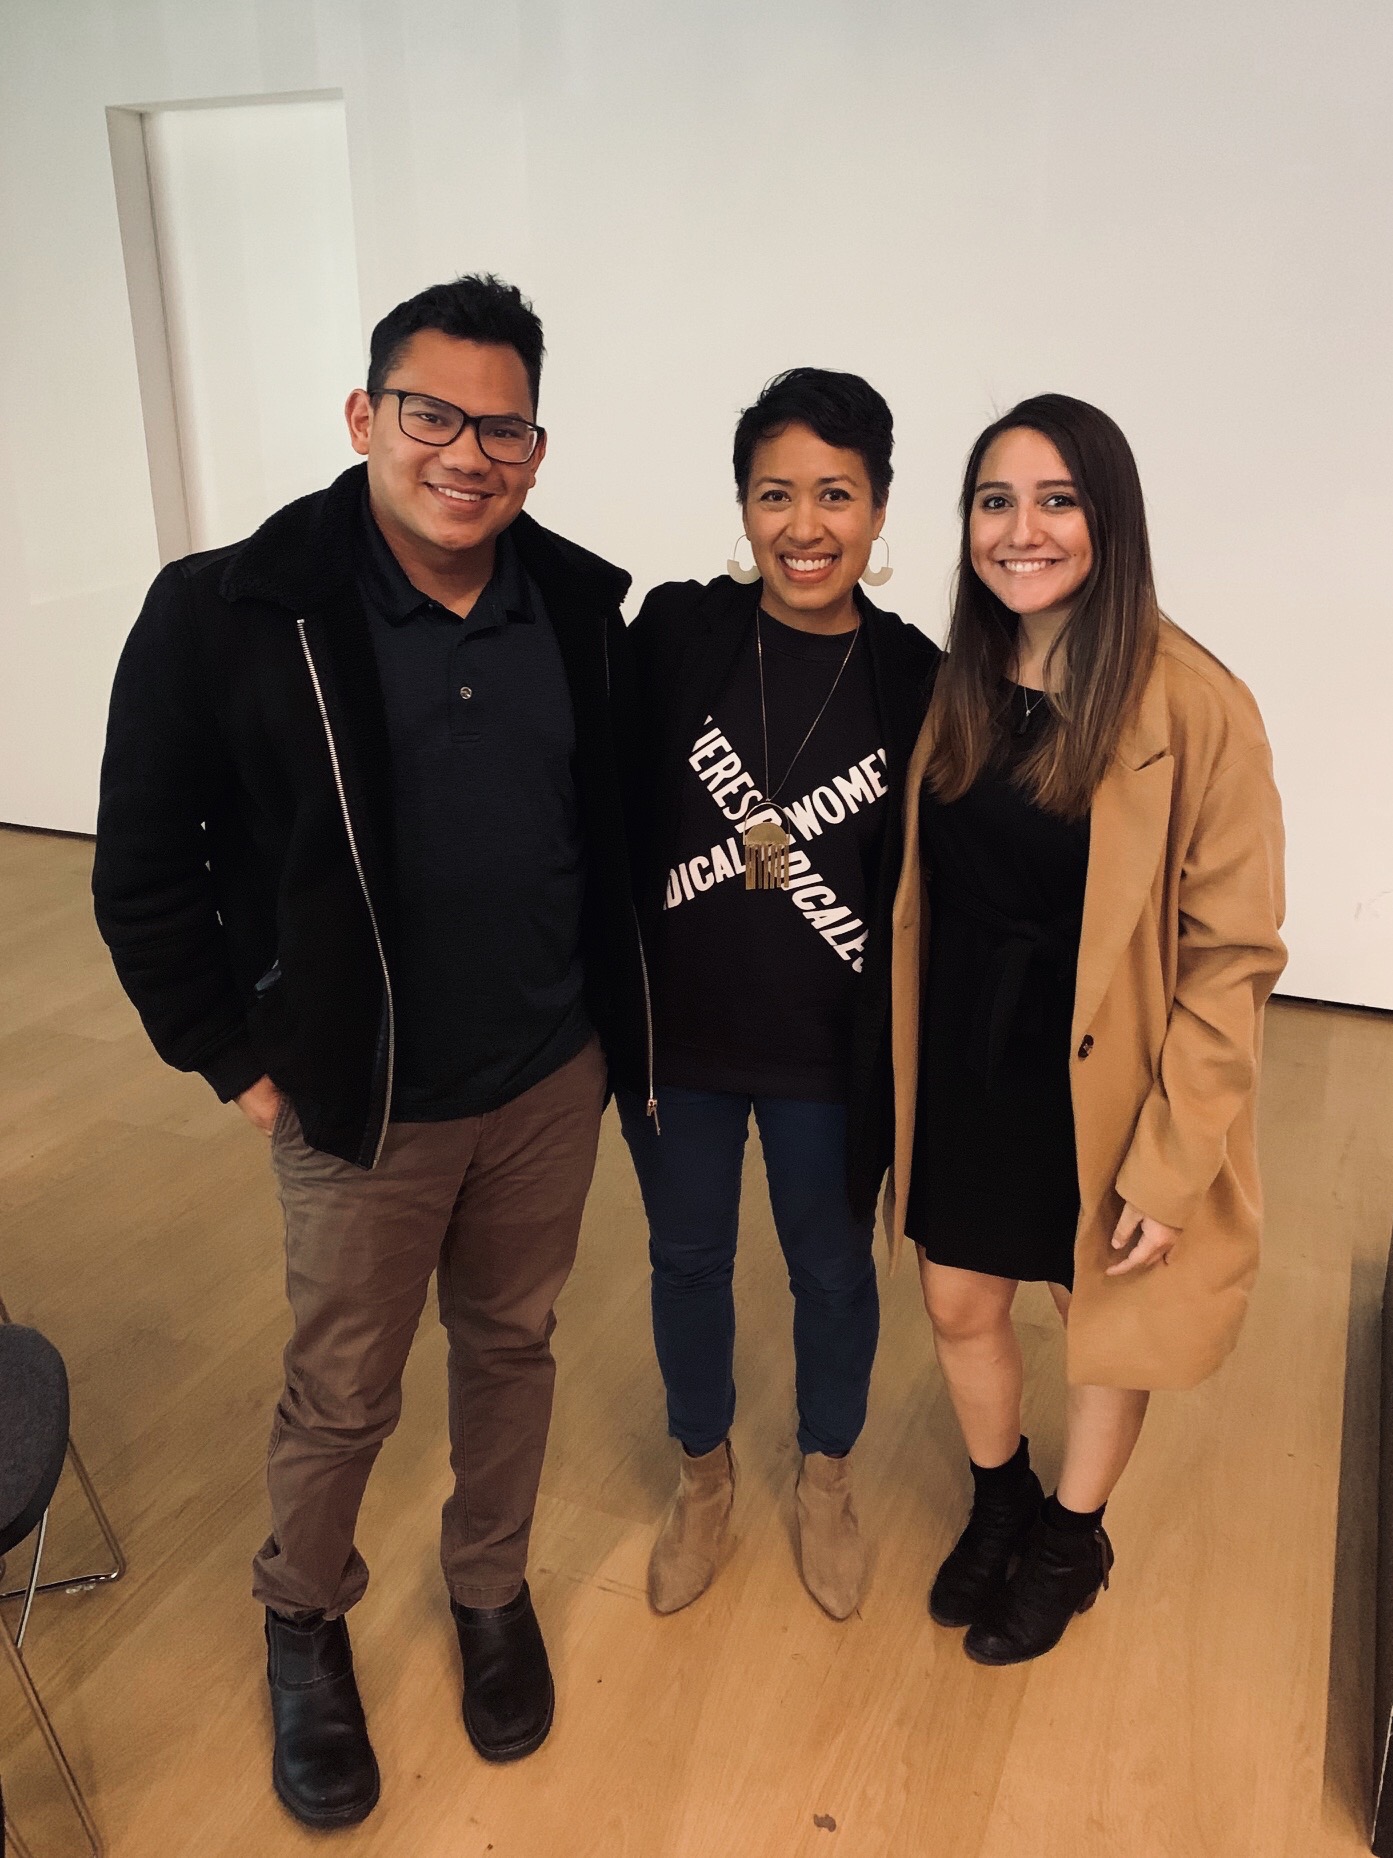 From left to right: 2018–20 LEAP Fellow Adrienne Adams; Associate Director, Academic Programs, Hammer Museum Theresa Sotto; and 2019–20 LEAP Fellow Deliasofia Zacarias, photo: Deliasofia Zacarias